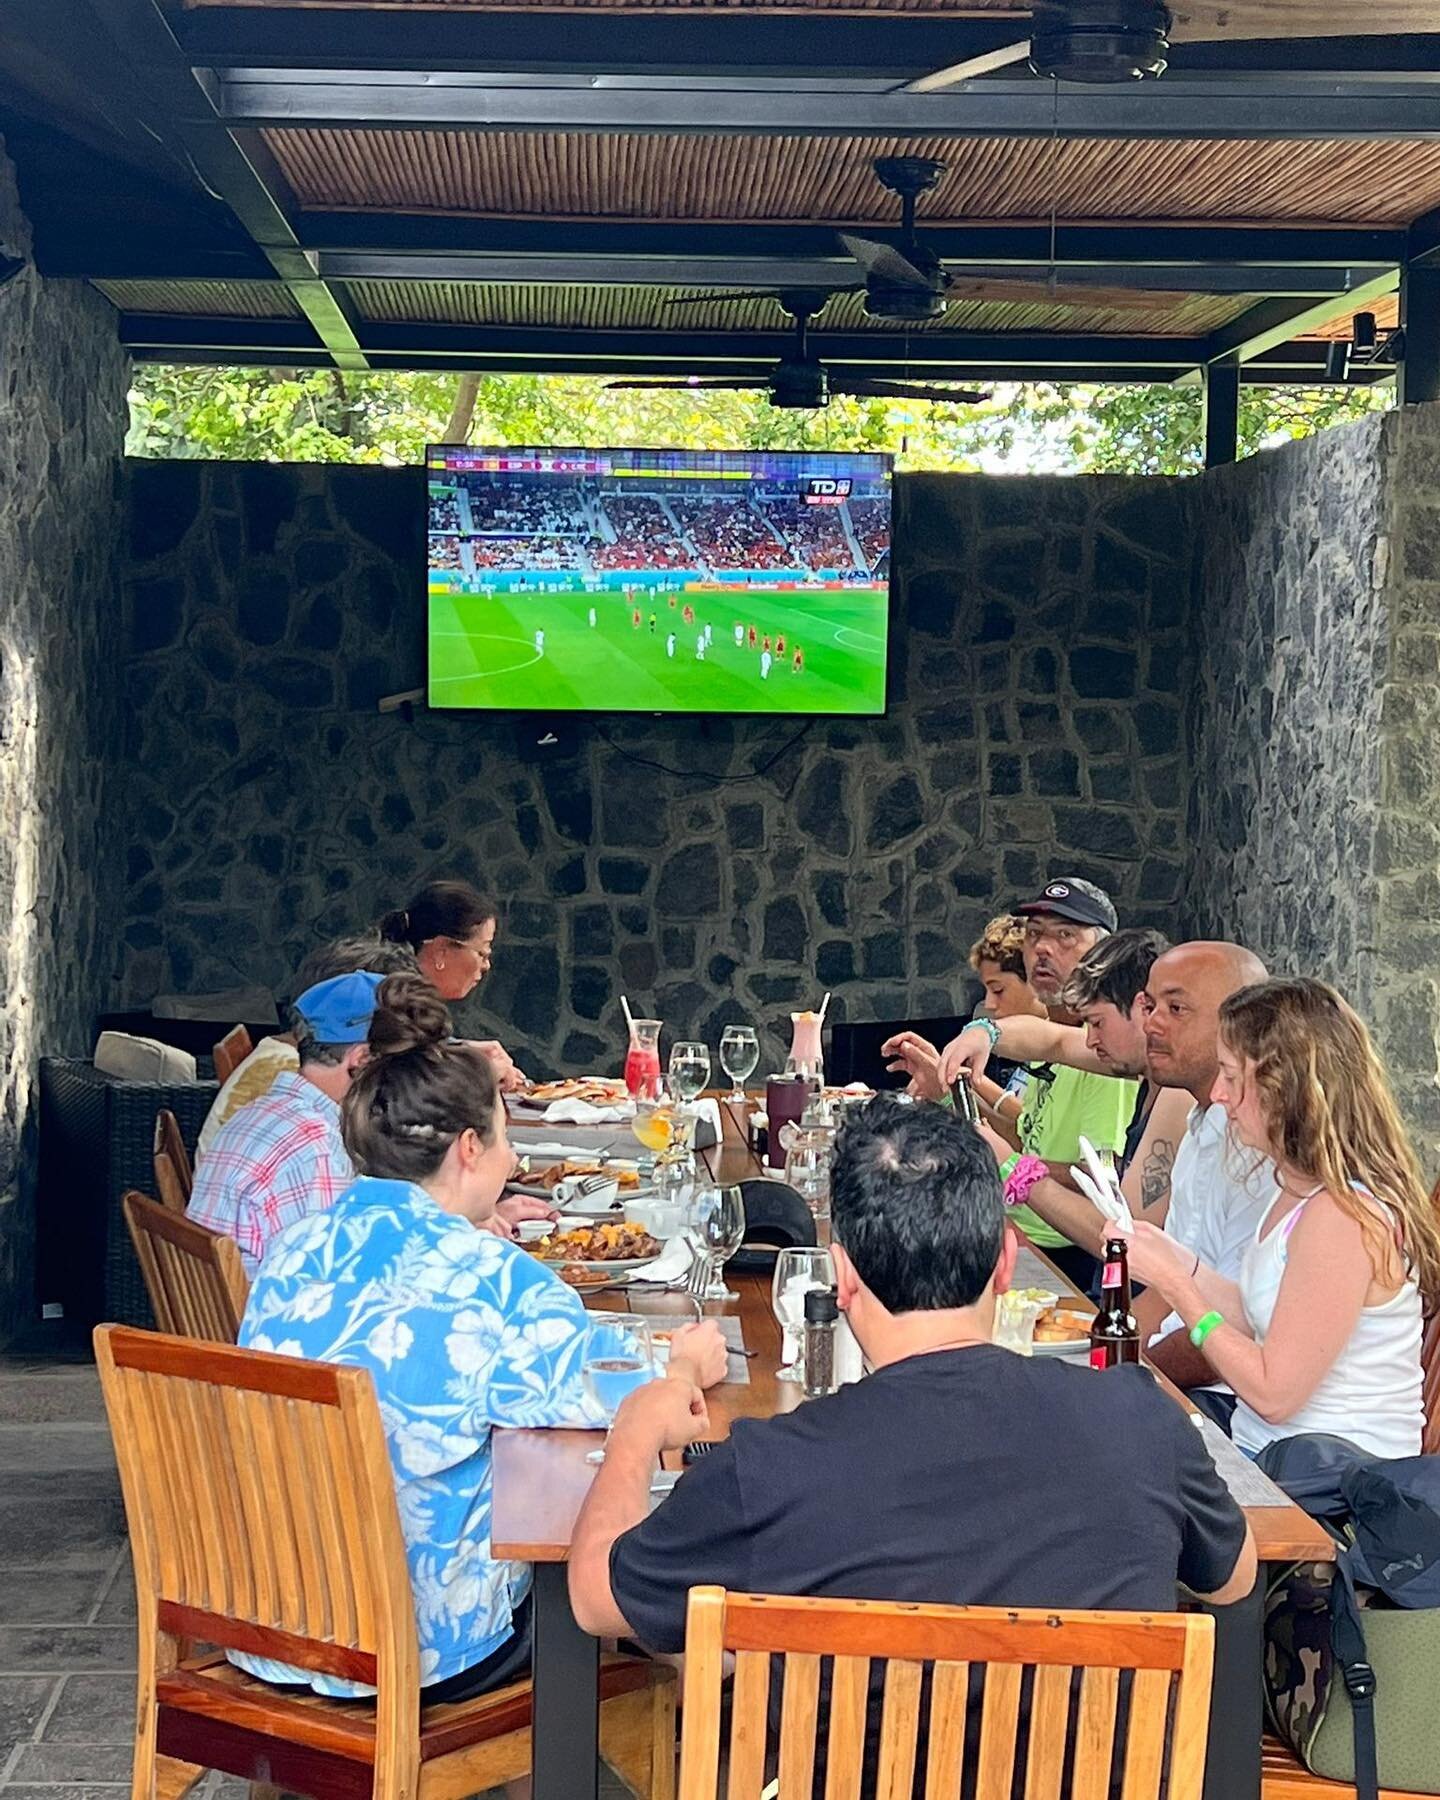 A toast to a weekend of watching soccer games on our poolside TVs! We love hosting you guys here at the beach club, and we know you'll love it too. ⚽️

To make sure you don't miss out on this event, come early and grab a seat! 🍻